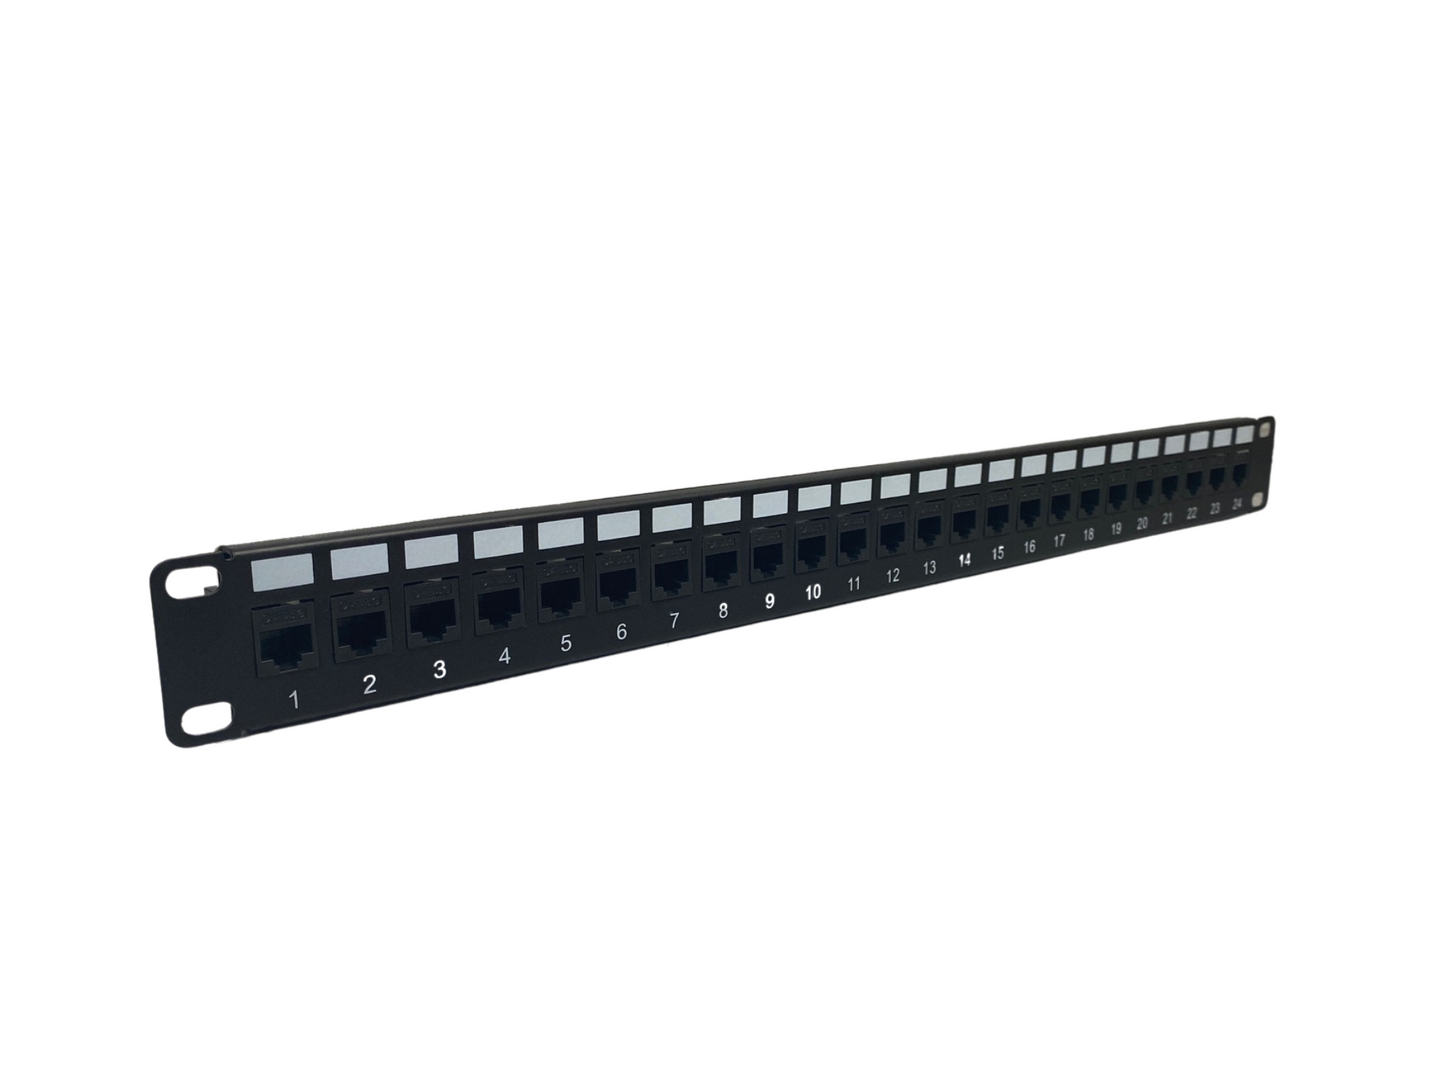 Cat 5e 24 Port 1U Keystone Coupler Patch Panel with Caged Nut Set (No Cable Management)